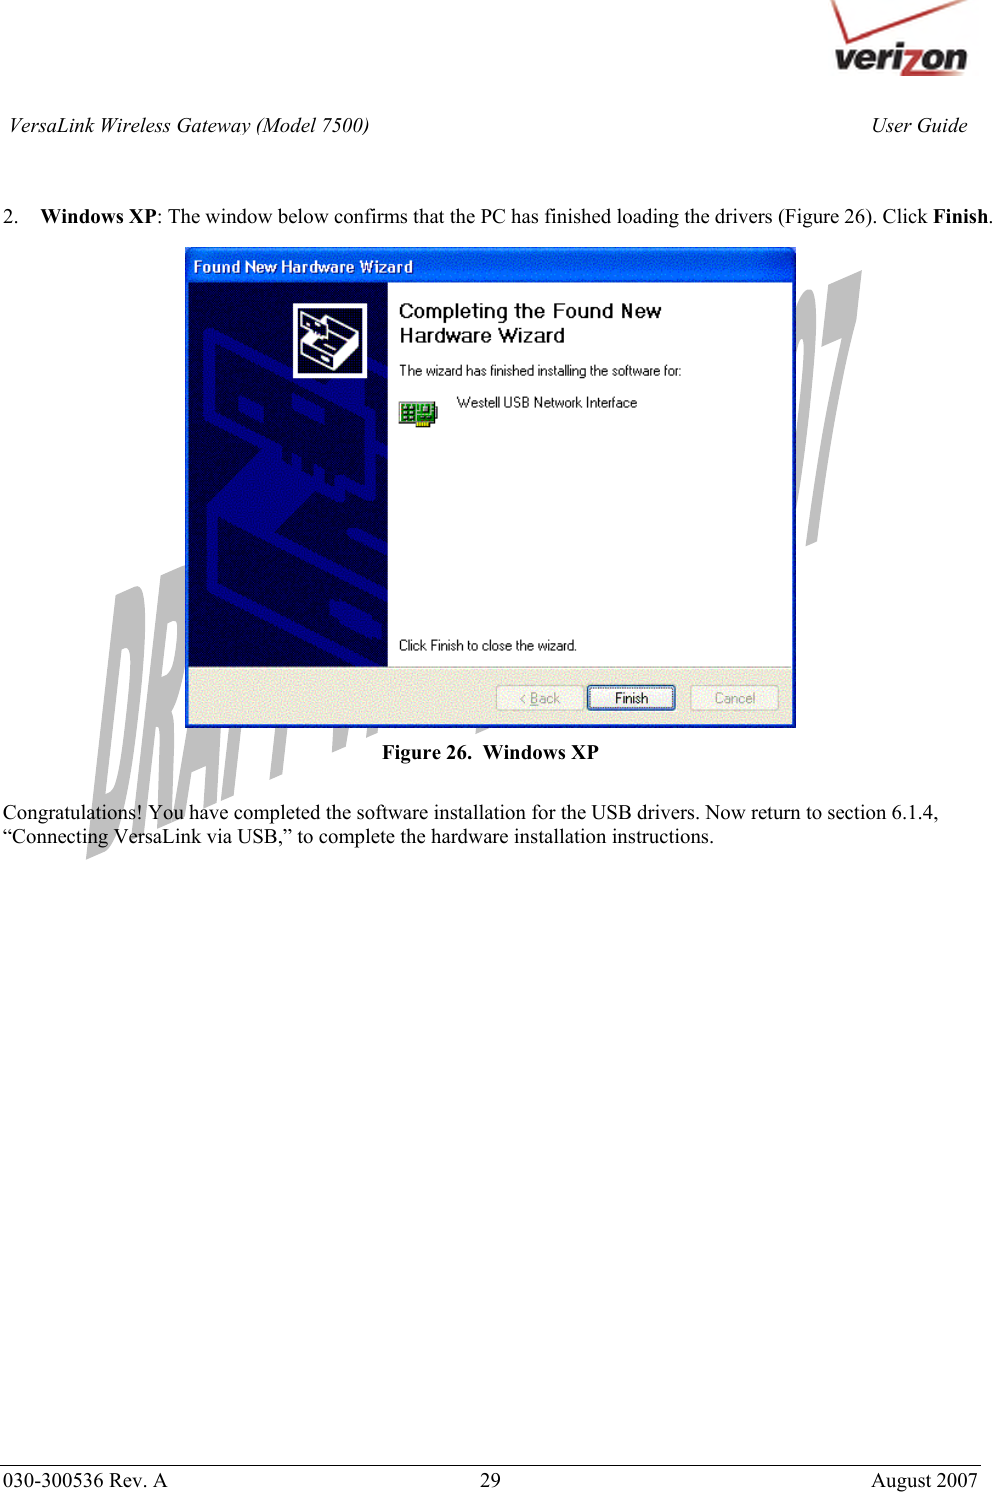       030-300536 Rev. A  29       August 2007 User GuideVersaLink Wireless Gateway (Model 7500)   2. Windows XP: The window below confirms that the PC has finished loading the drivers (Figure 26). Click Finish.   Figure 26.  Windows XP  Congratulations! You have completed the software installation for the USB drivers. Now return to section 6.1.4, “Connecting VersaLink via USB,” to complete the hardware installation instructions.                     